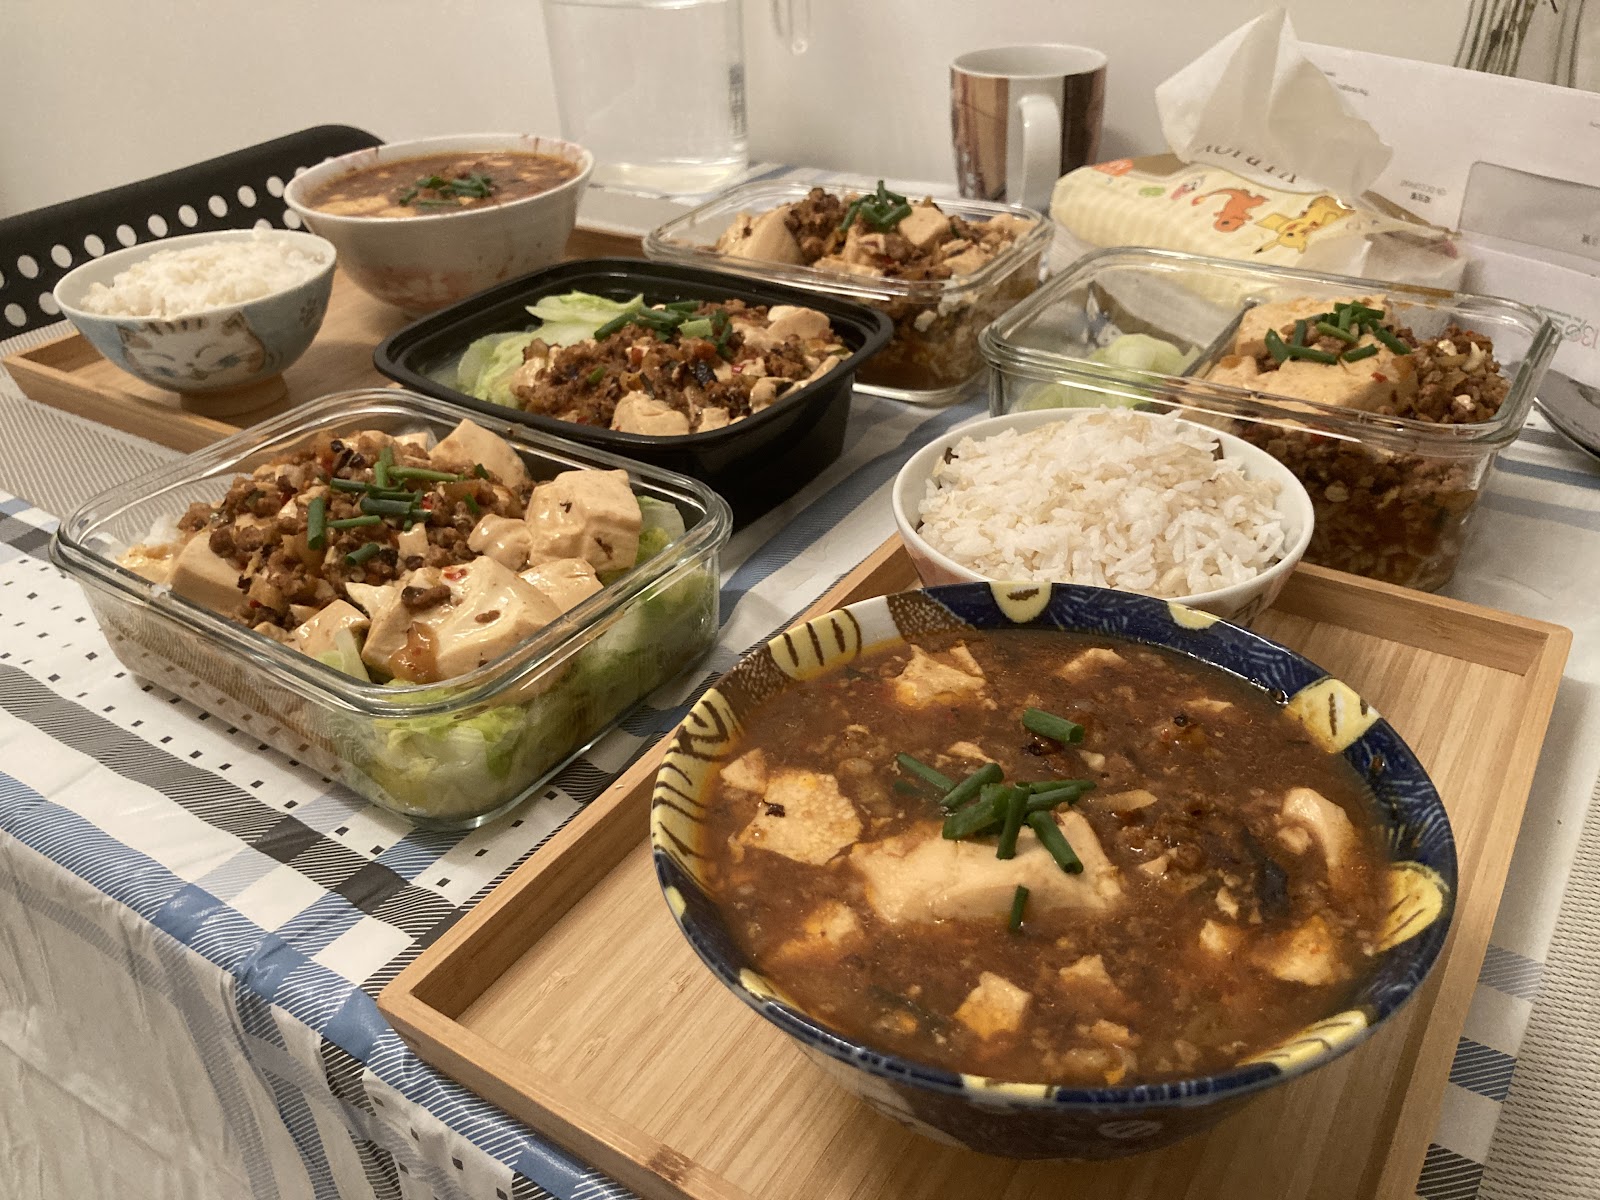 Mapo Tofu – Spicy, saucy and big bold flavours